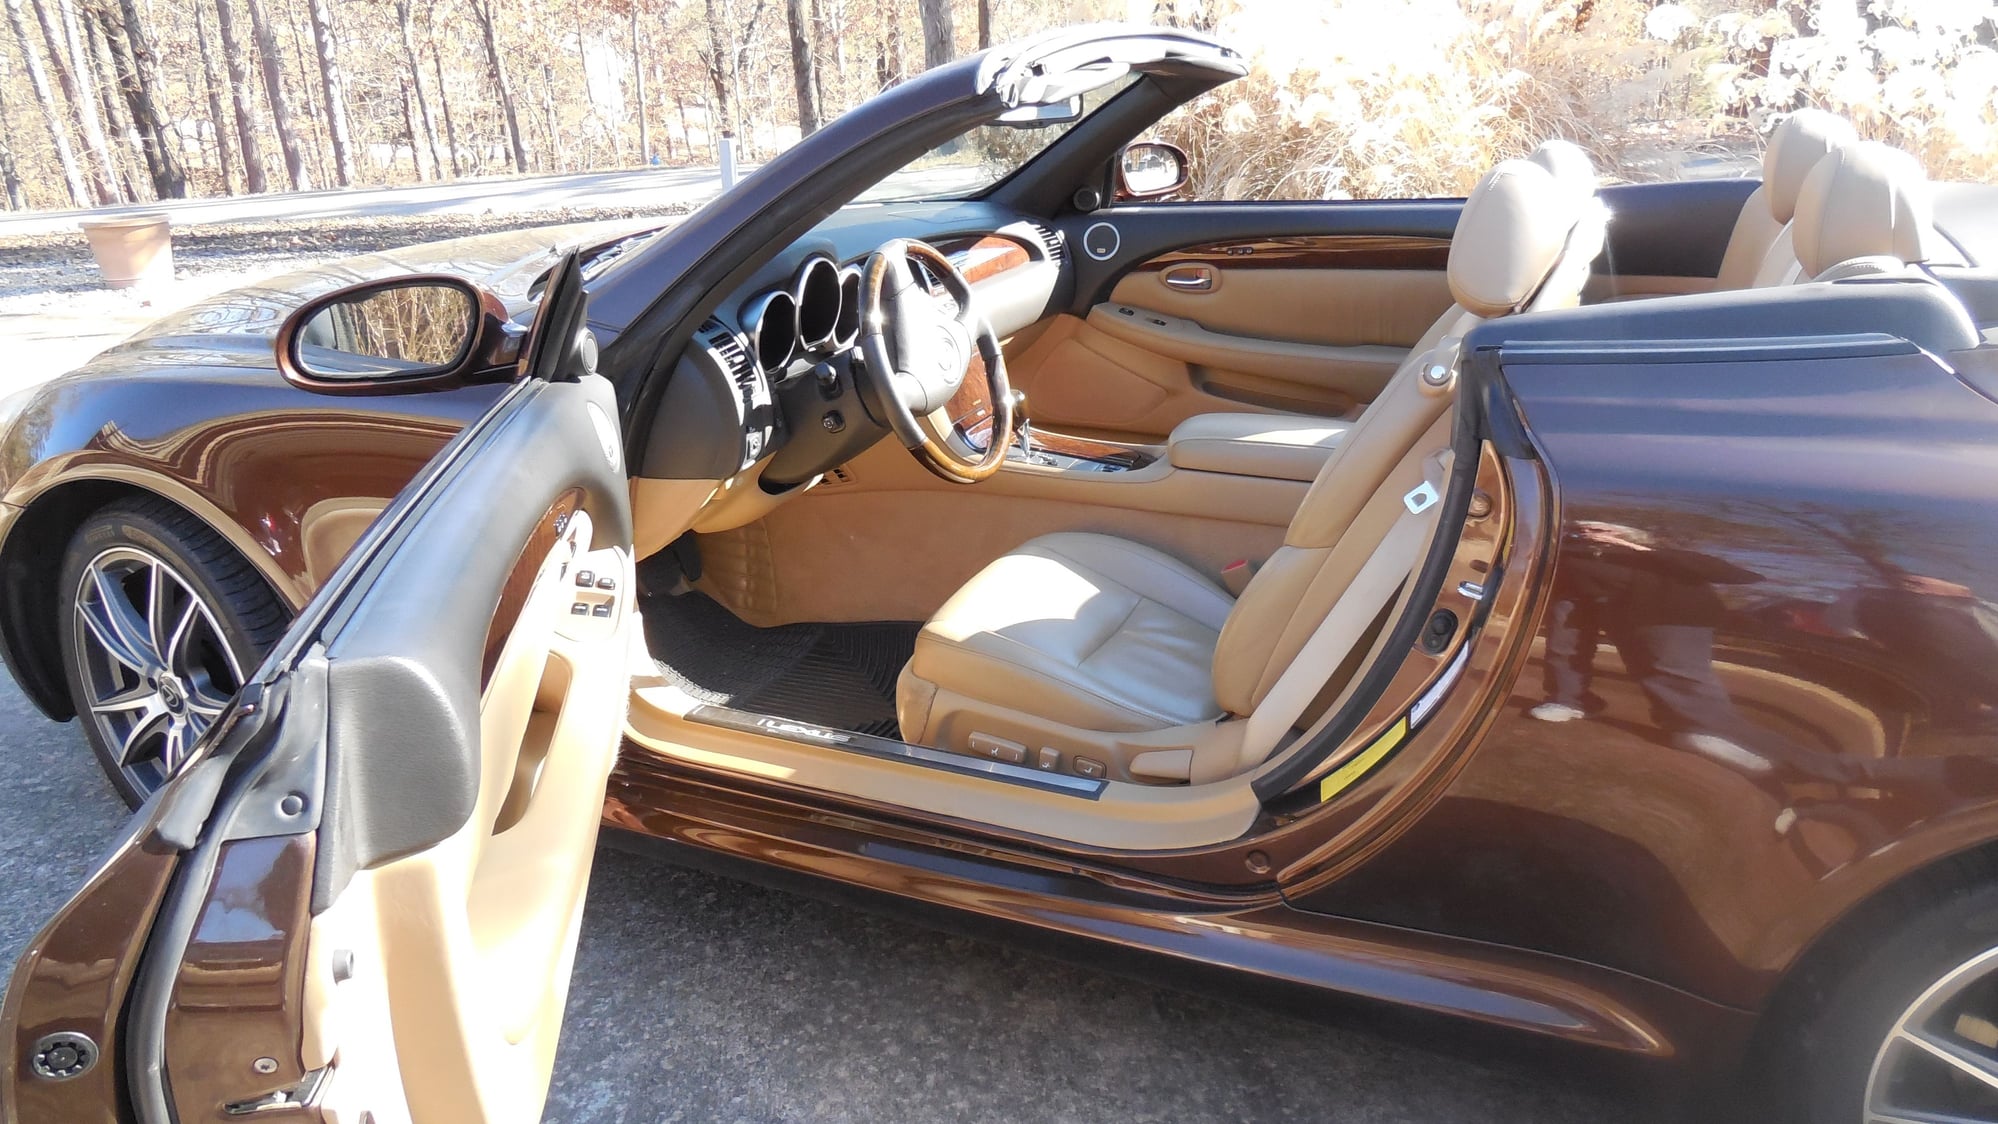 2006 Lexus SC430 - 2006 SC 430 Tiger Eye Mica - Used - VIN JTHFN48Y469002012 - 70,666 Miles - 8 cyl - 2WD - Automatic - Convertible - Other - Bella Vista, AR 72714, United States